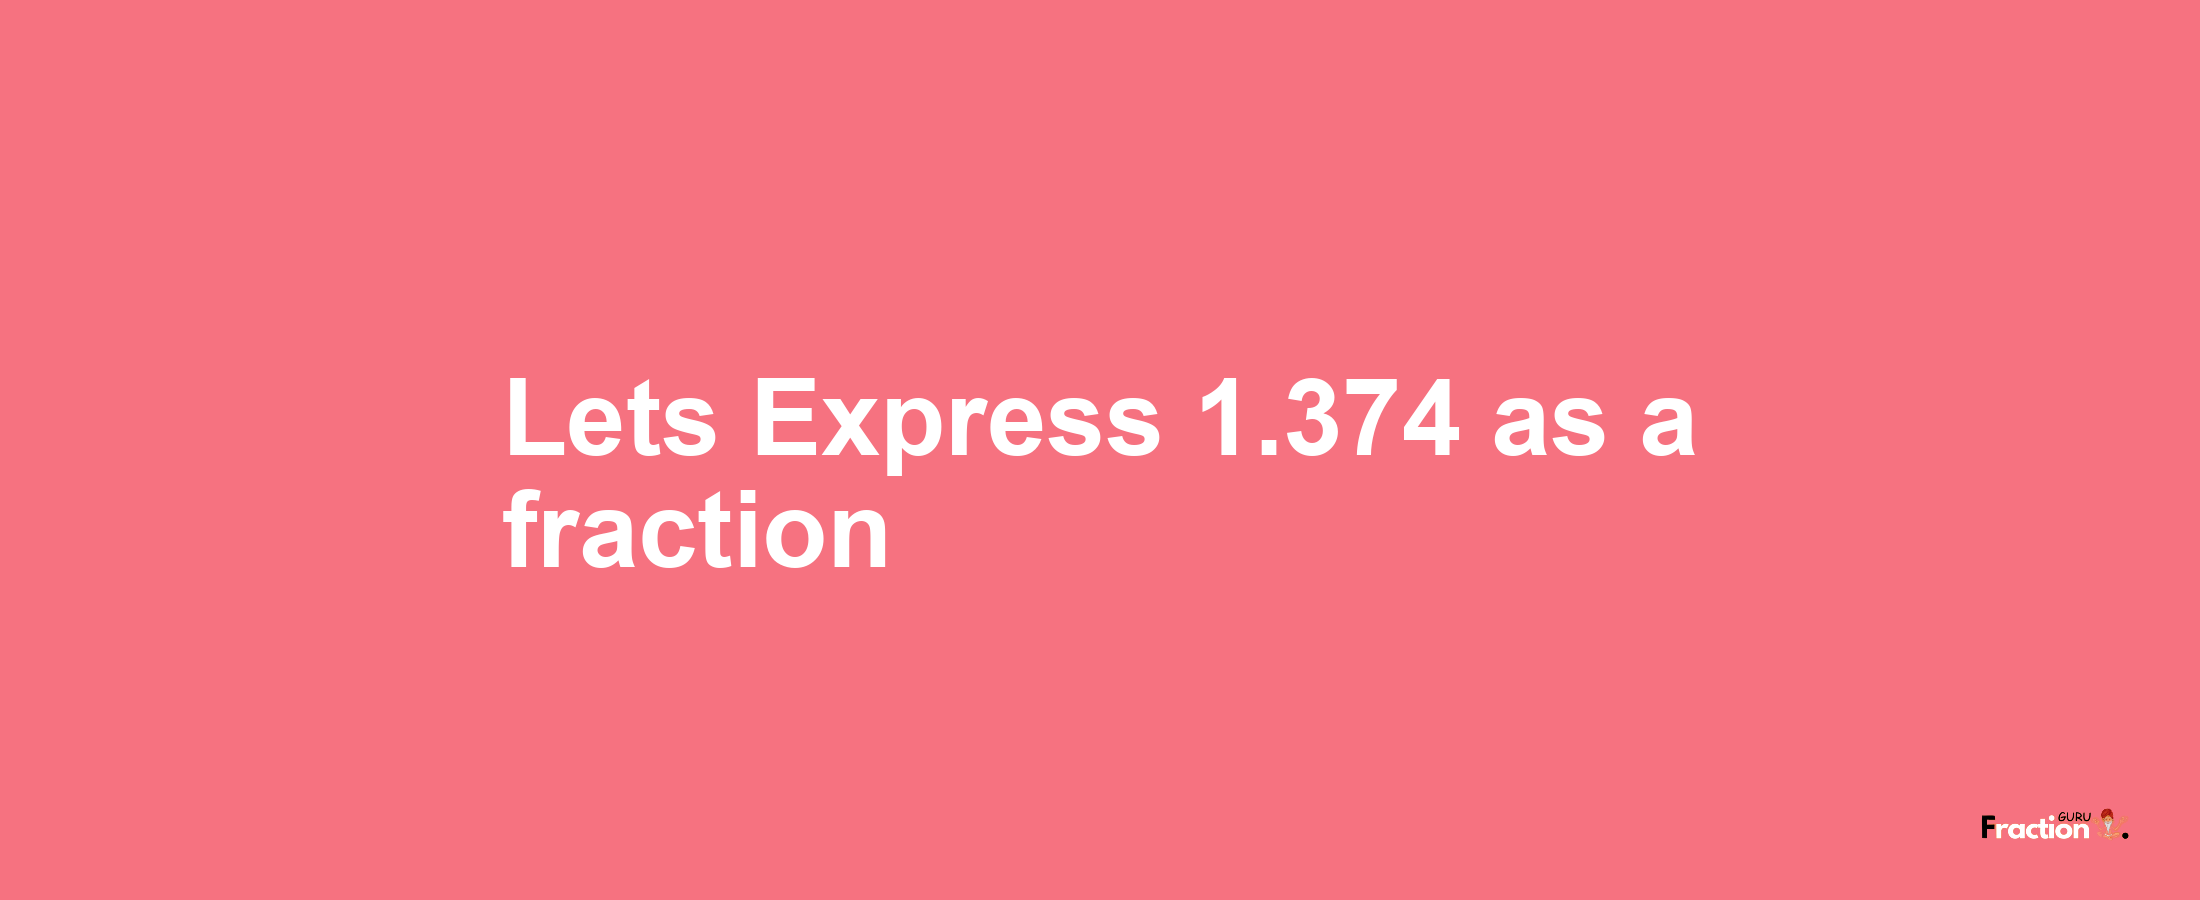 Lets Express 1.374 as afraction